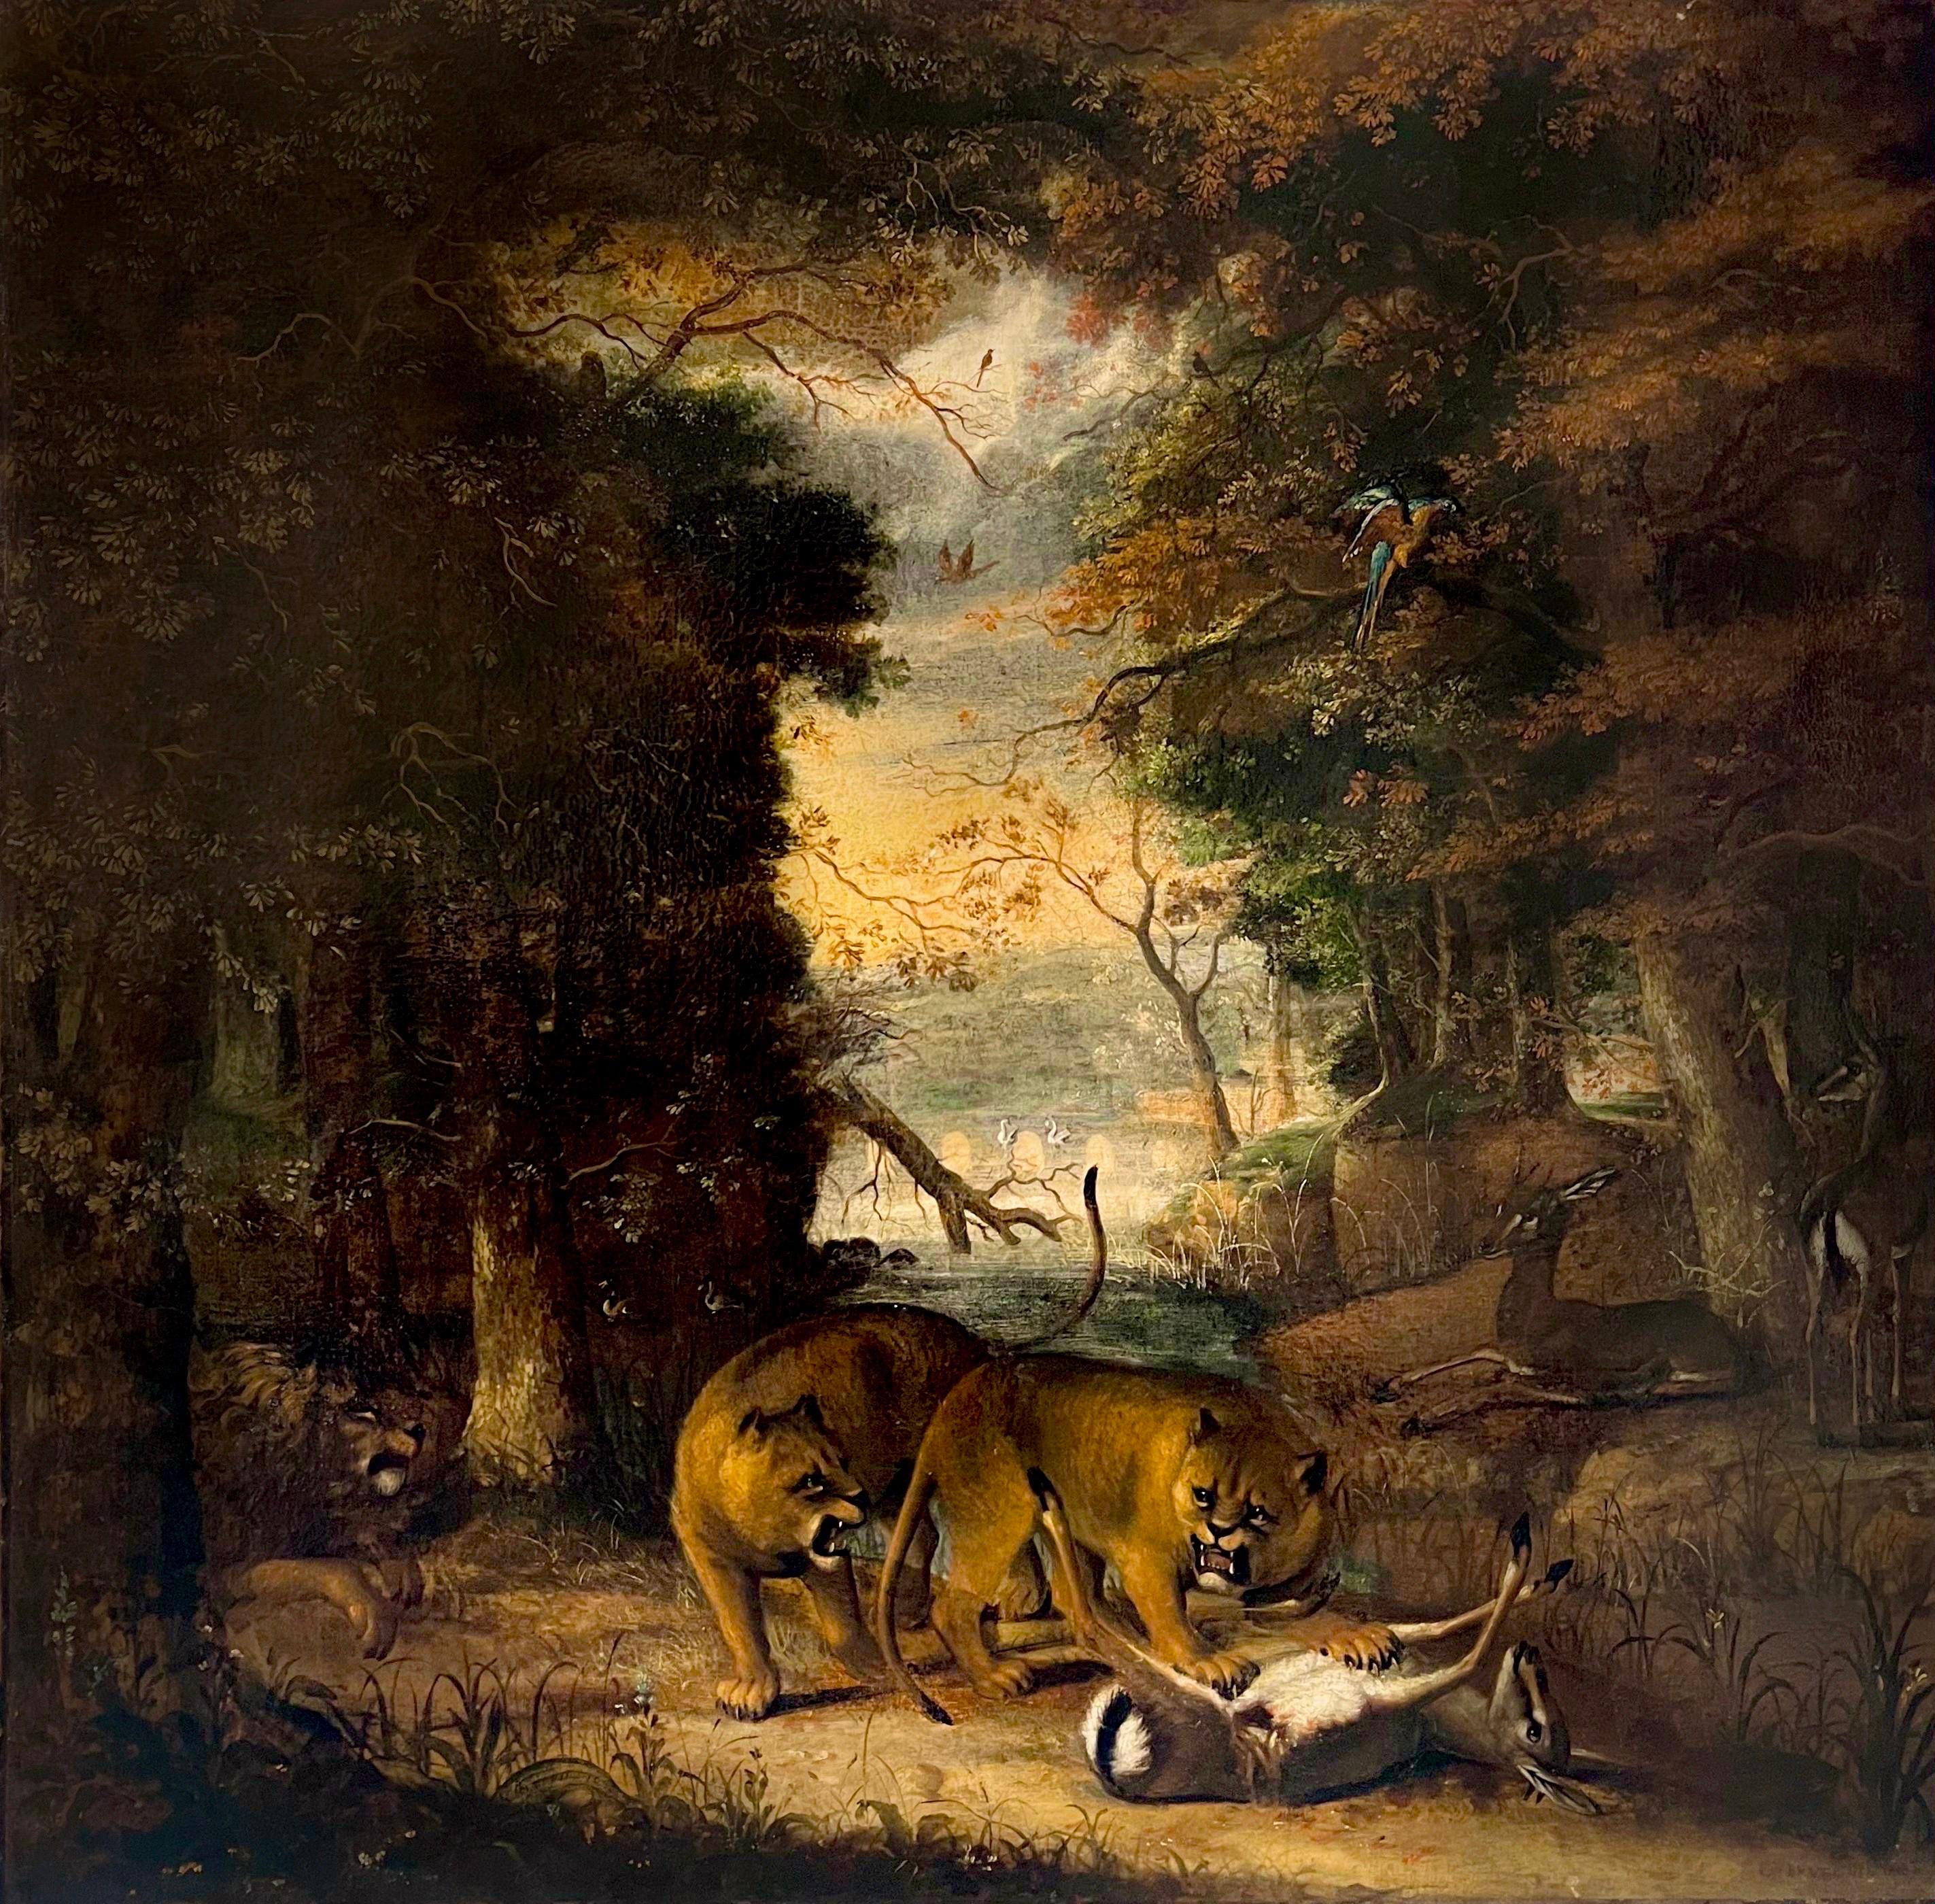 Roelant Savery (follower of) Landscape Painting - Old master oil from 1661 - Majestic lion hunting landscape - Brueghel hunt